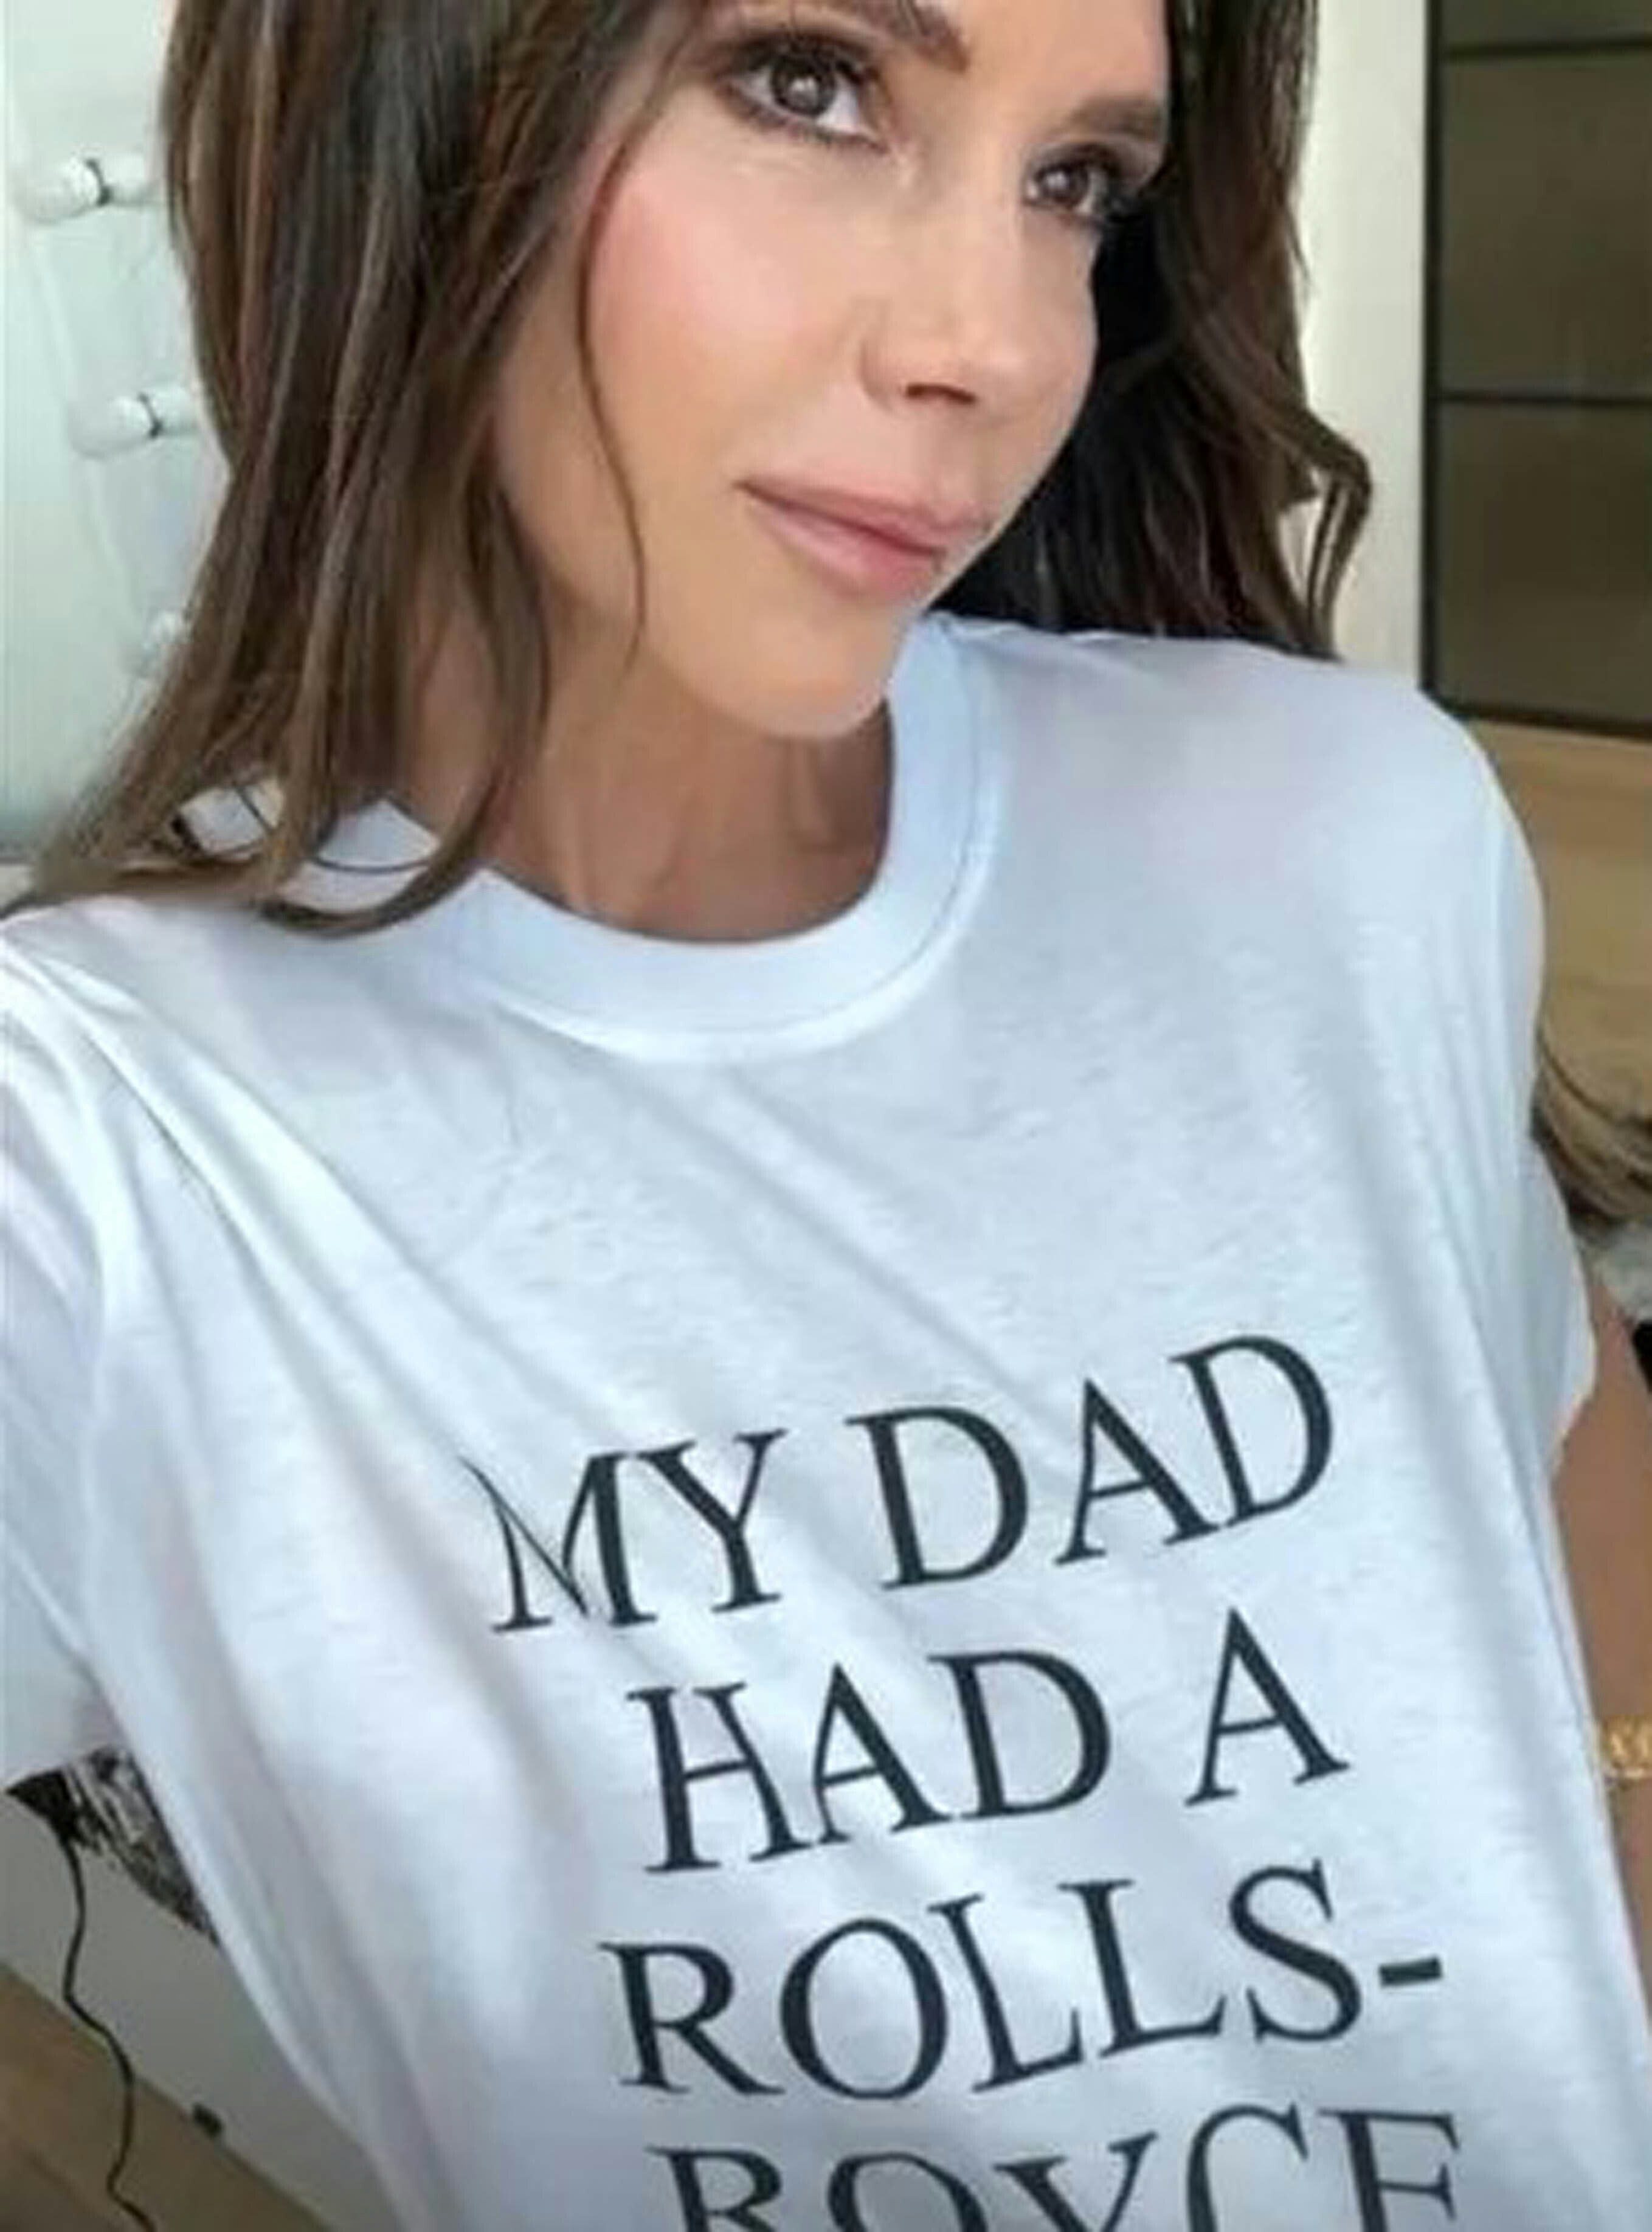 20-11-2023 Celebrity Selfies Pictured: Victoria Beckham released "My dad has a Rolls-Royce" T-shirt PLANET PHOTOS www.planetphotos.co.uk info@planetphotos.co.uk +44 (0)1959 532 227